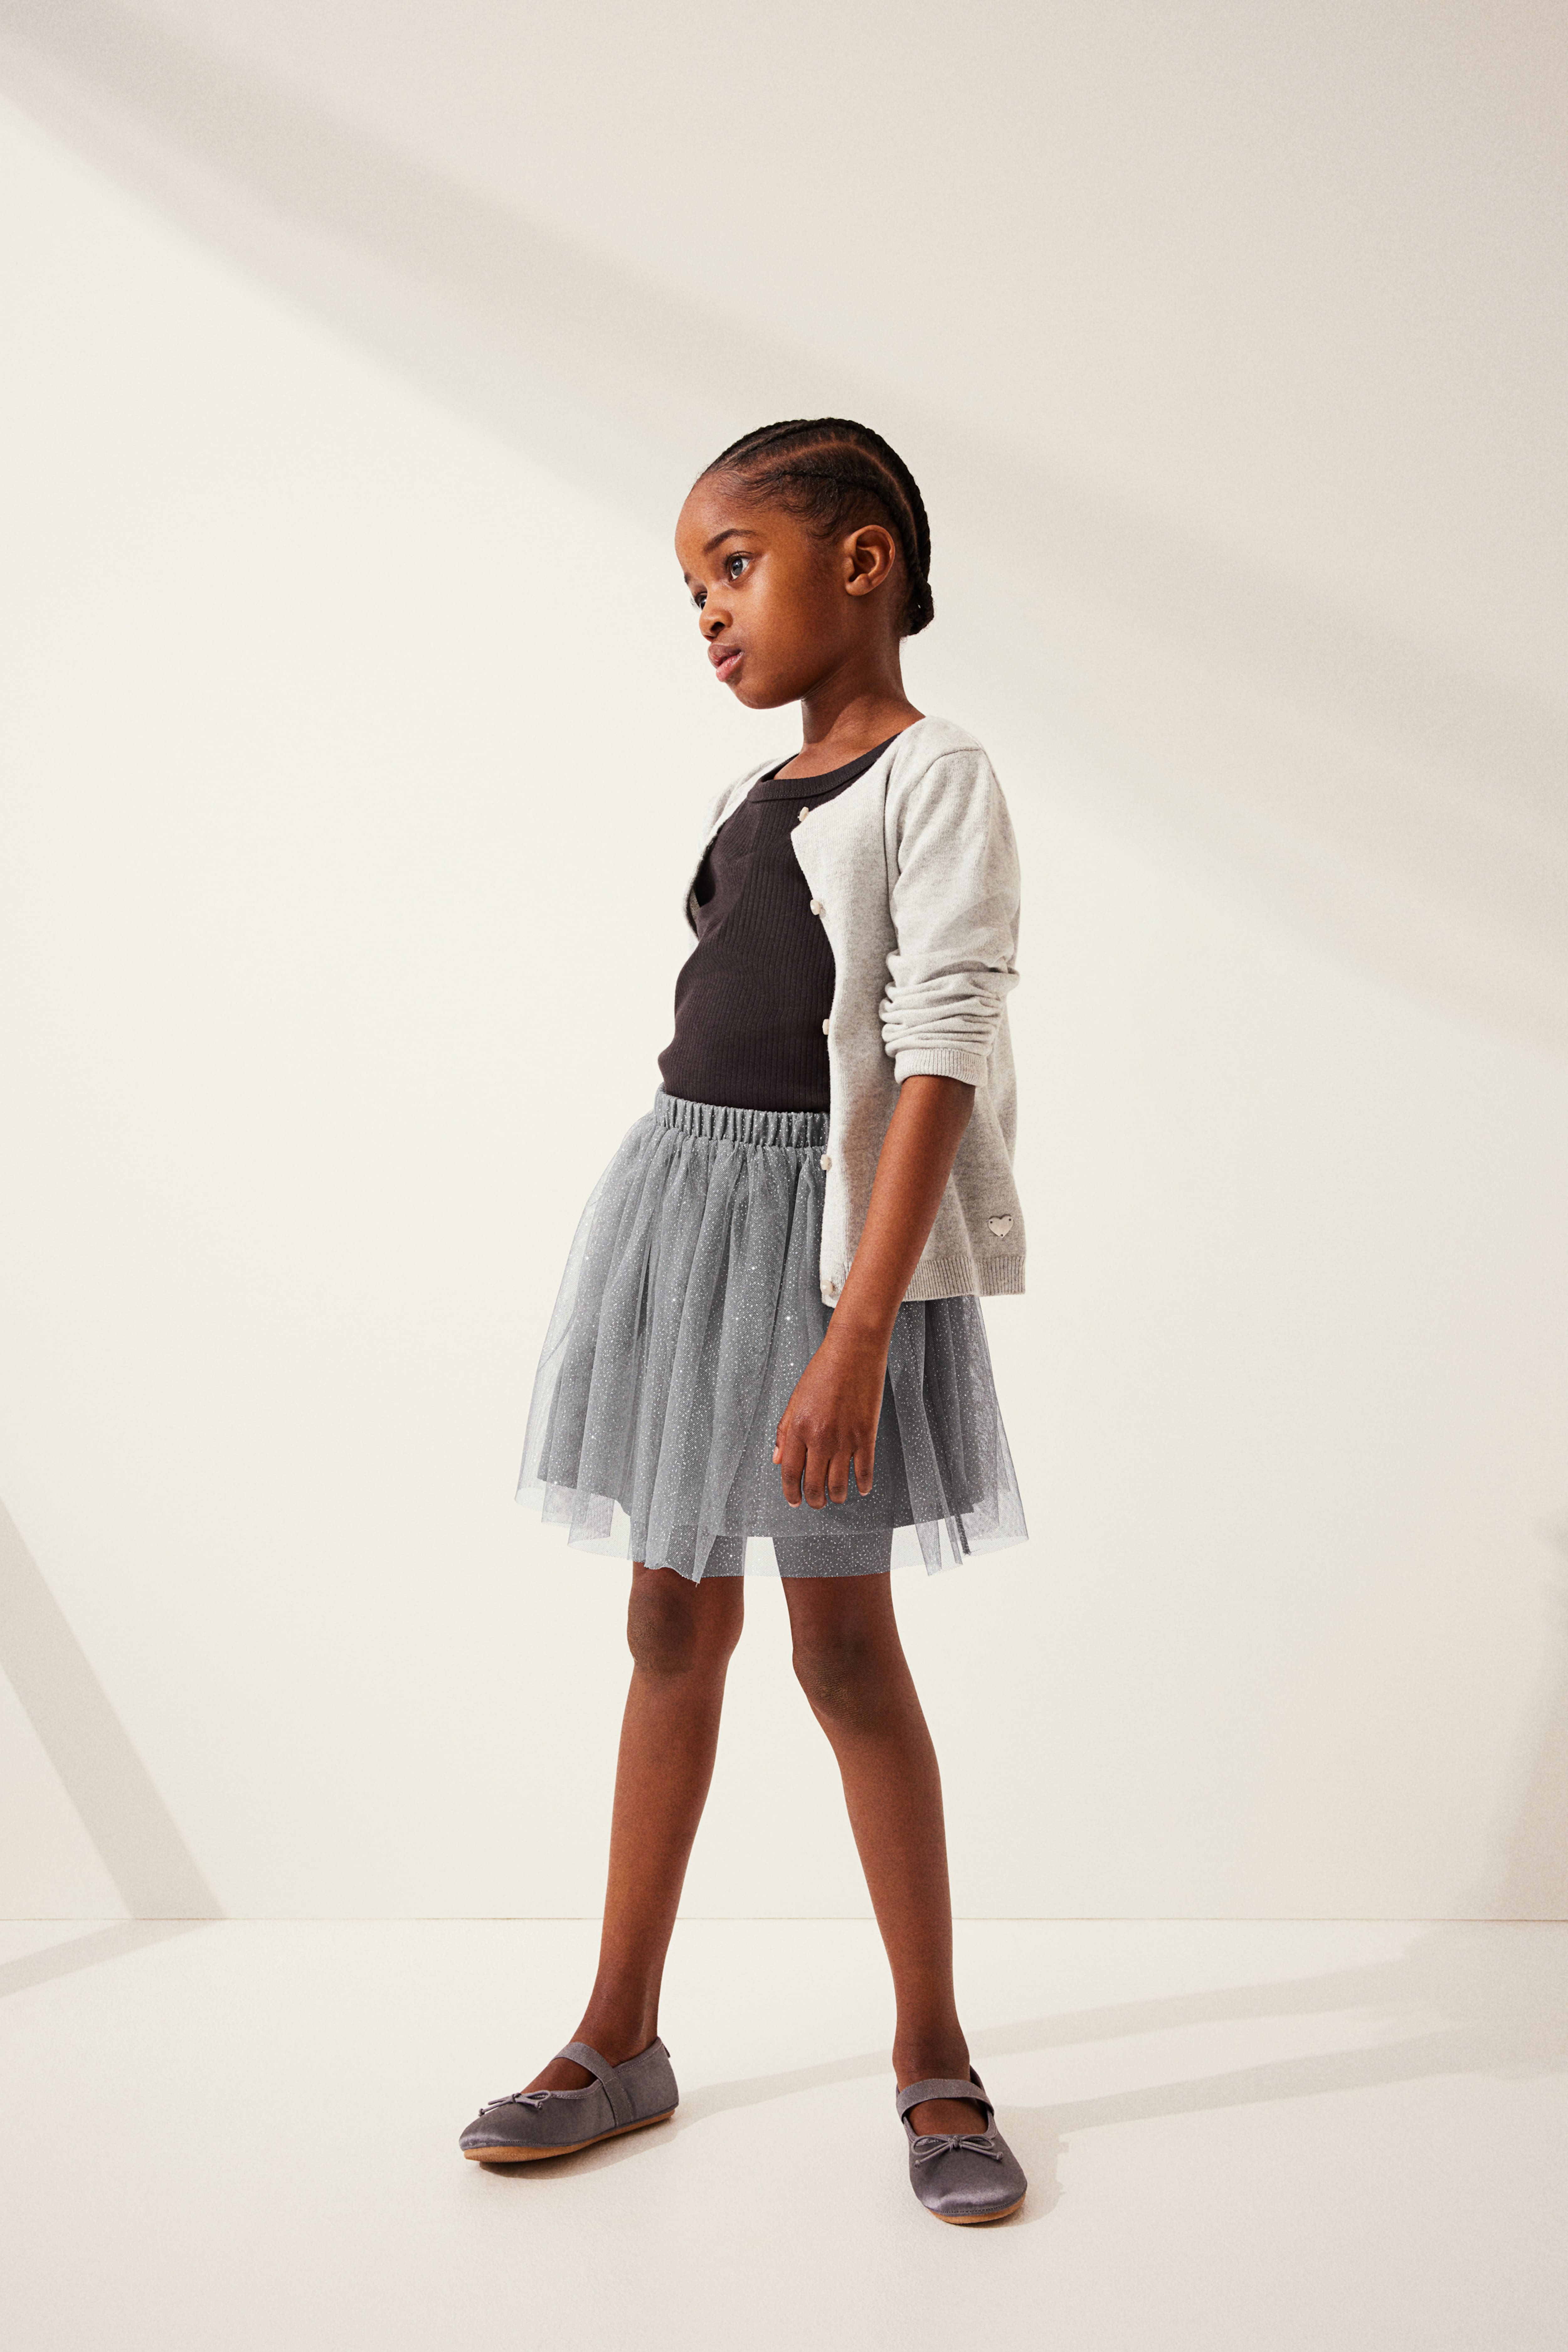 Cotton Plain Girls White School Skirts, Small, Age Group: 5 Years at Rs 270  in Jalandhar